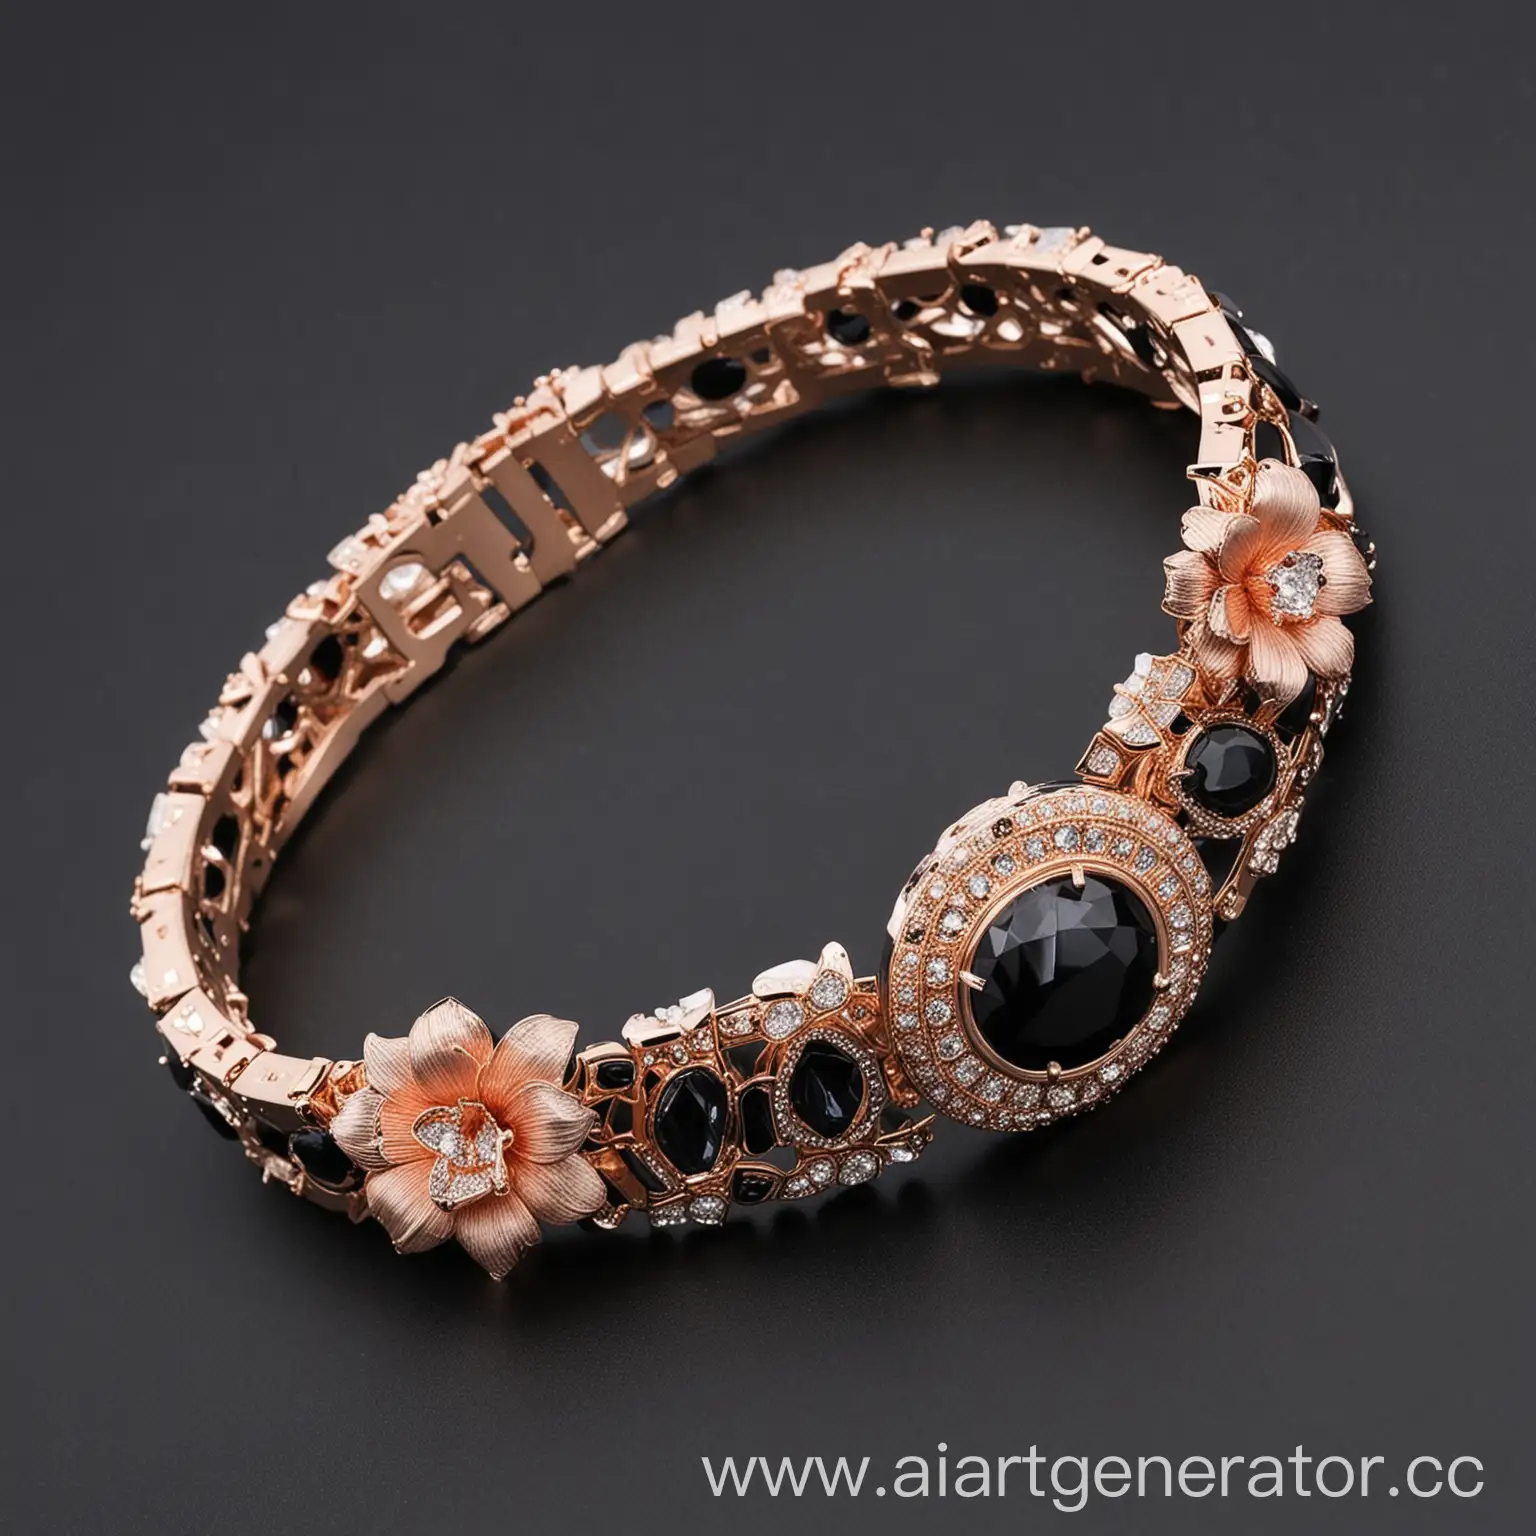 Cartier style bracelet decoration in futuristic style, with black stone, glass and crystal, strict forces, rose flowers